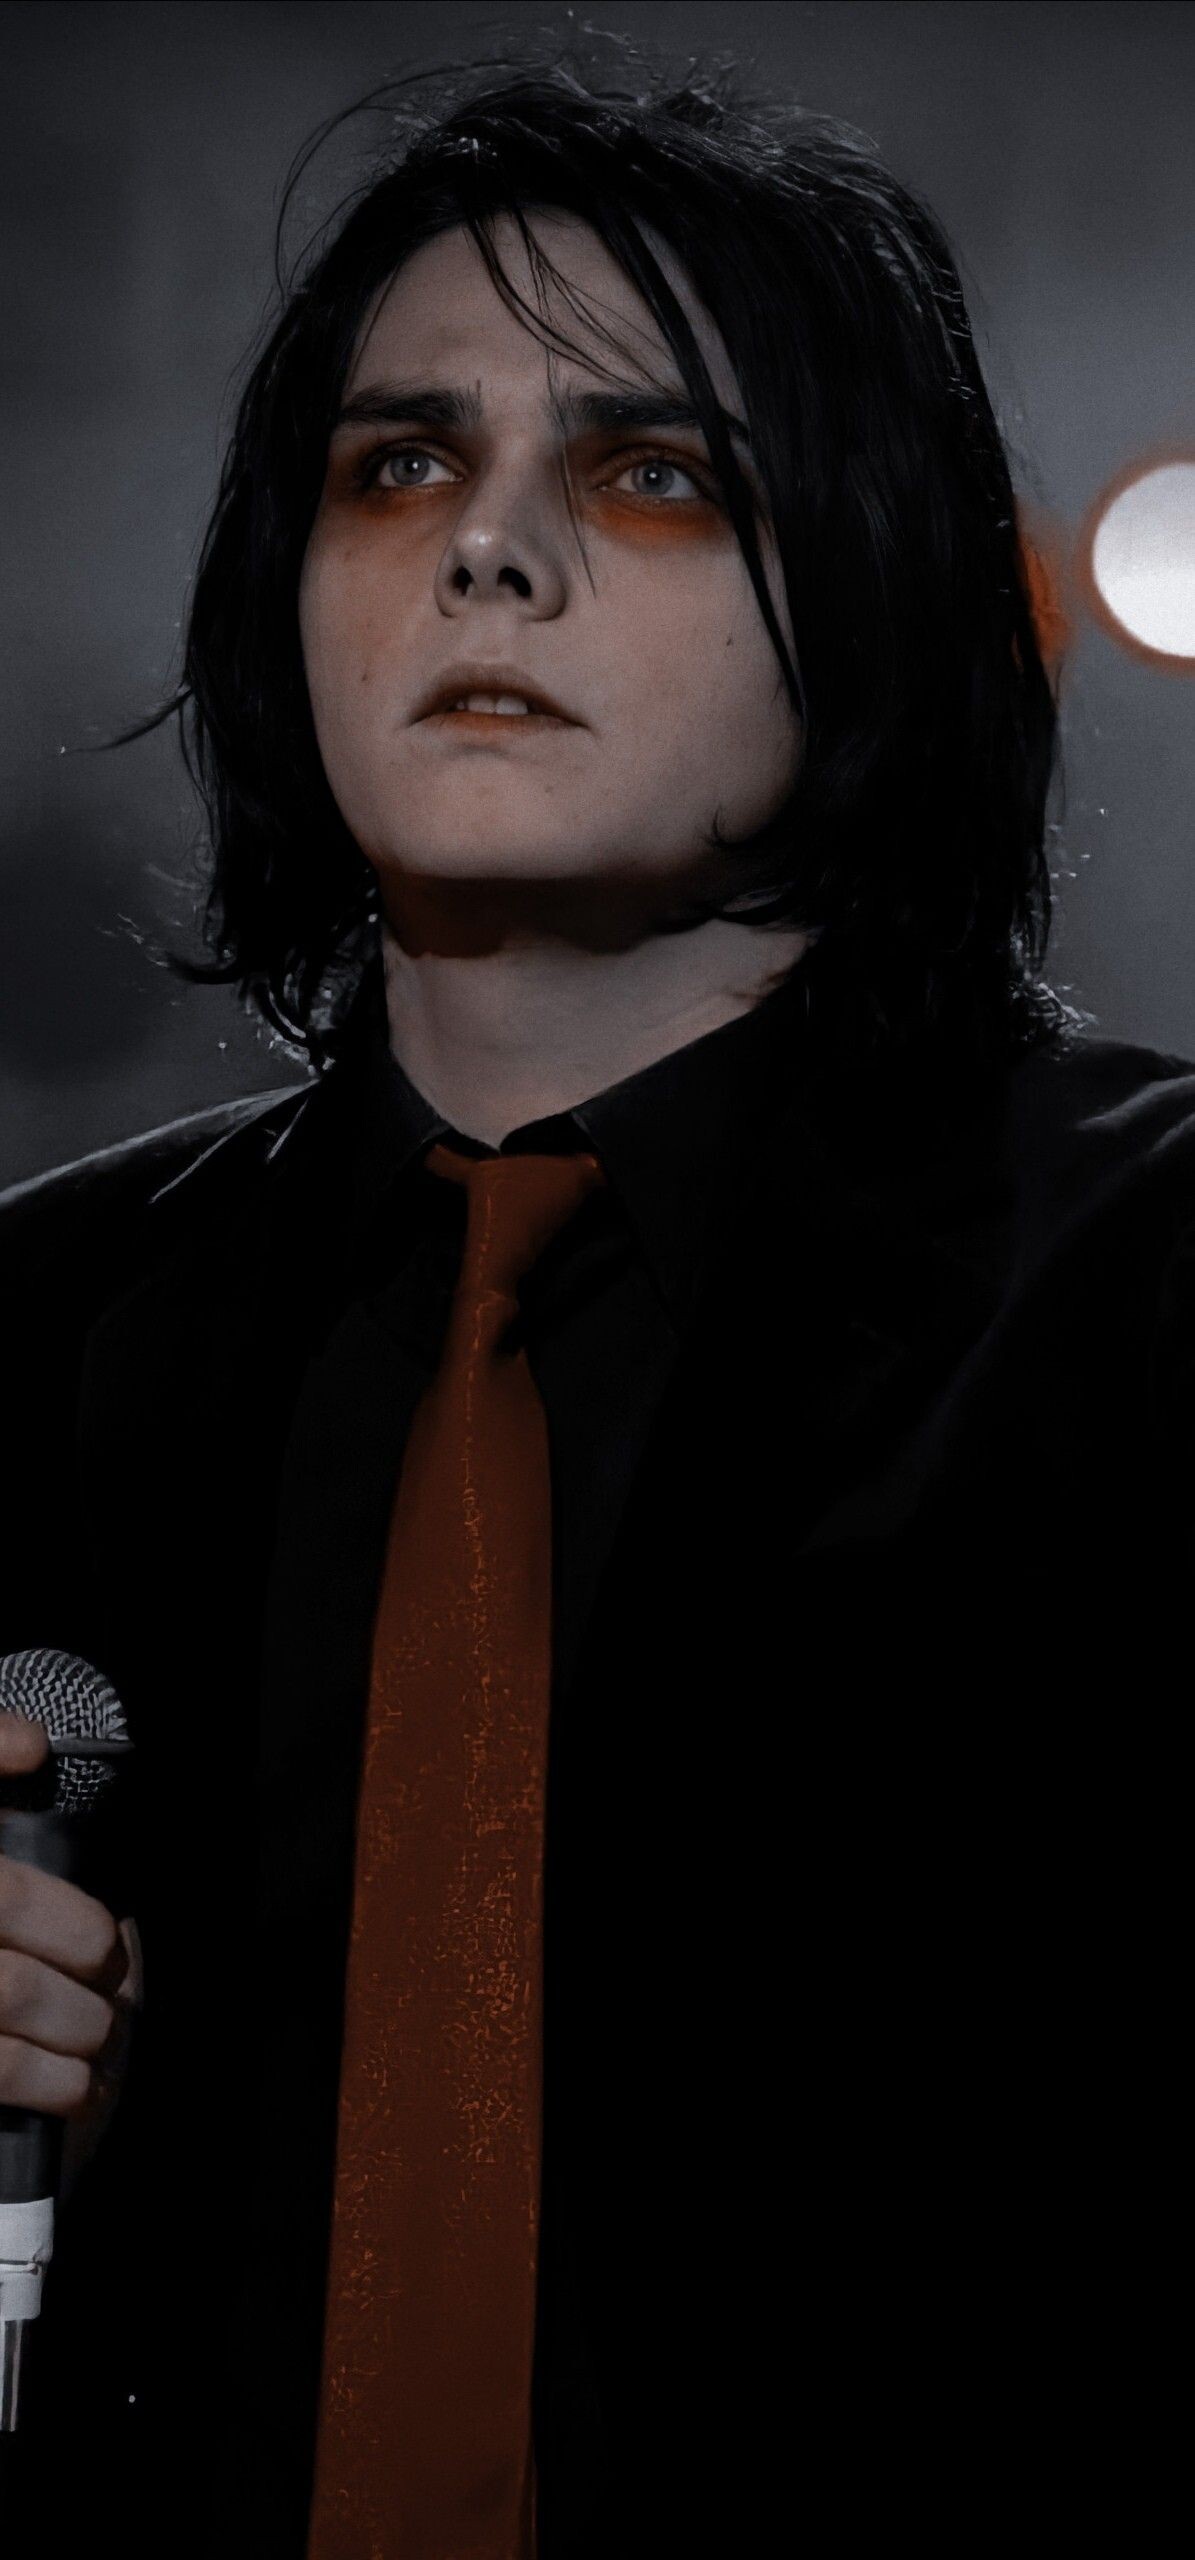 Gerard Way: My Chemical Romance, Emo style, An American punk-rock singer-songwriter. 1200x2560 HD Background.